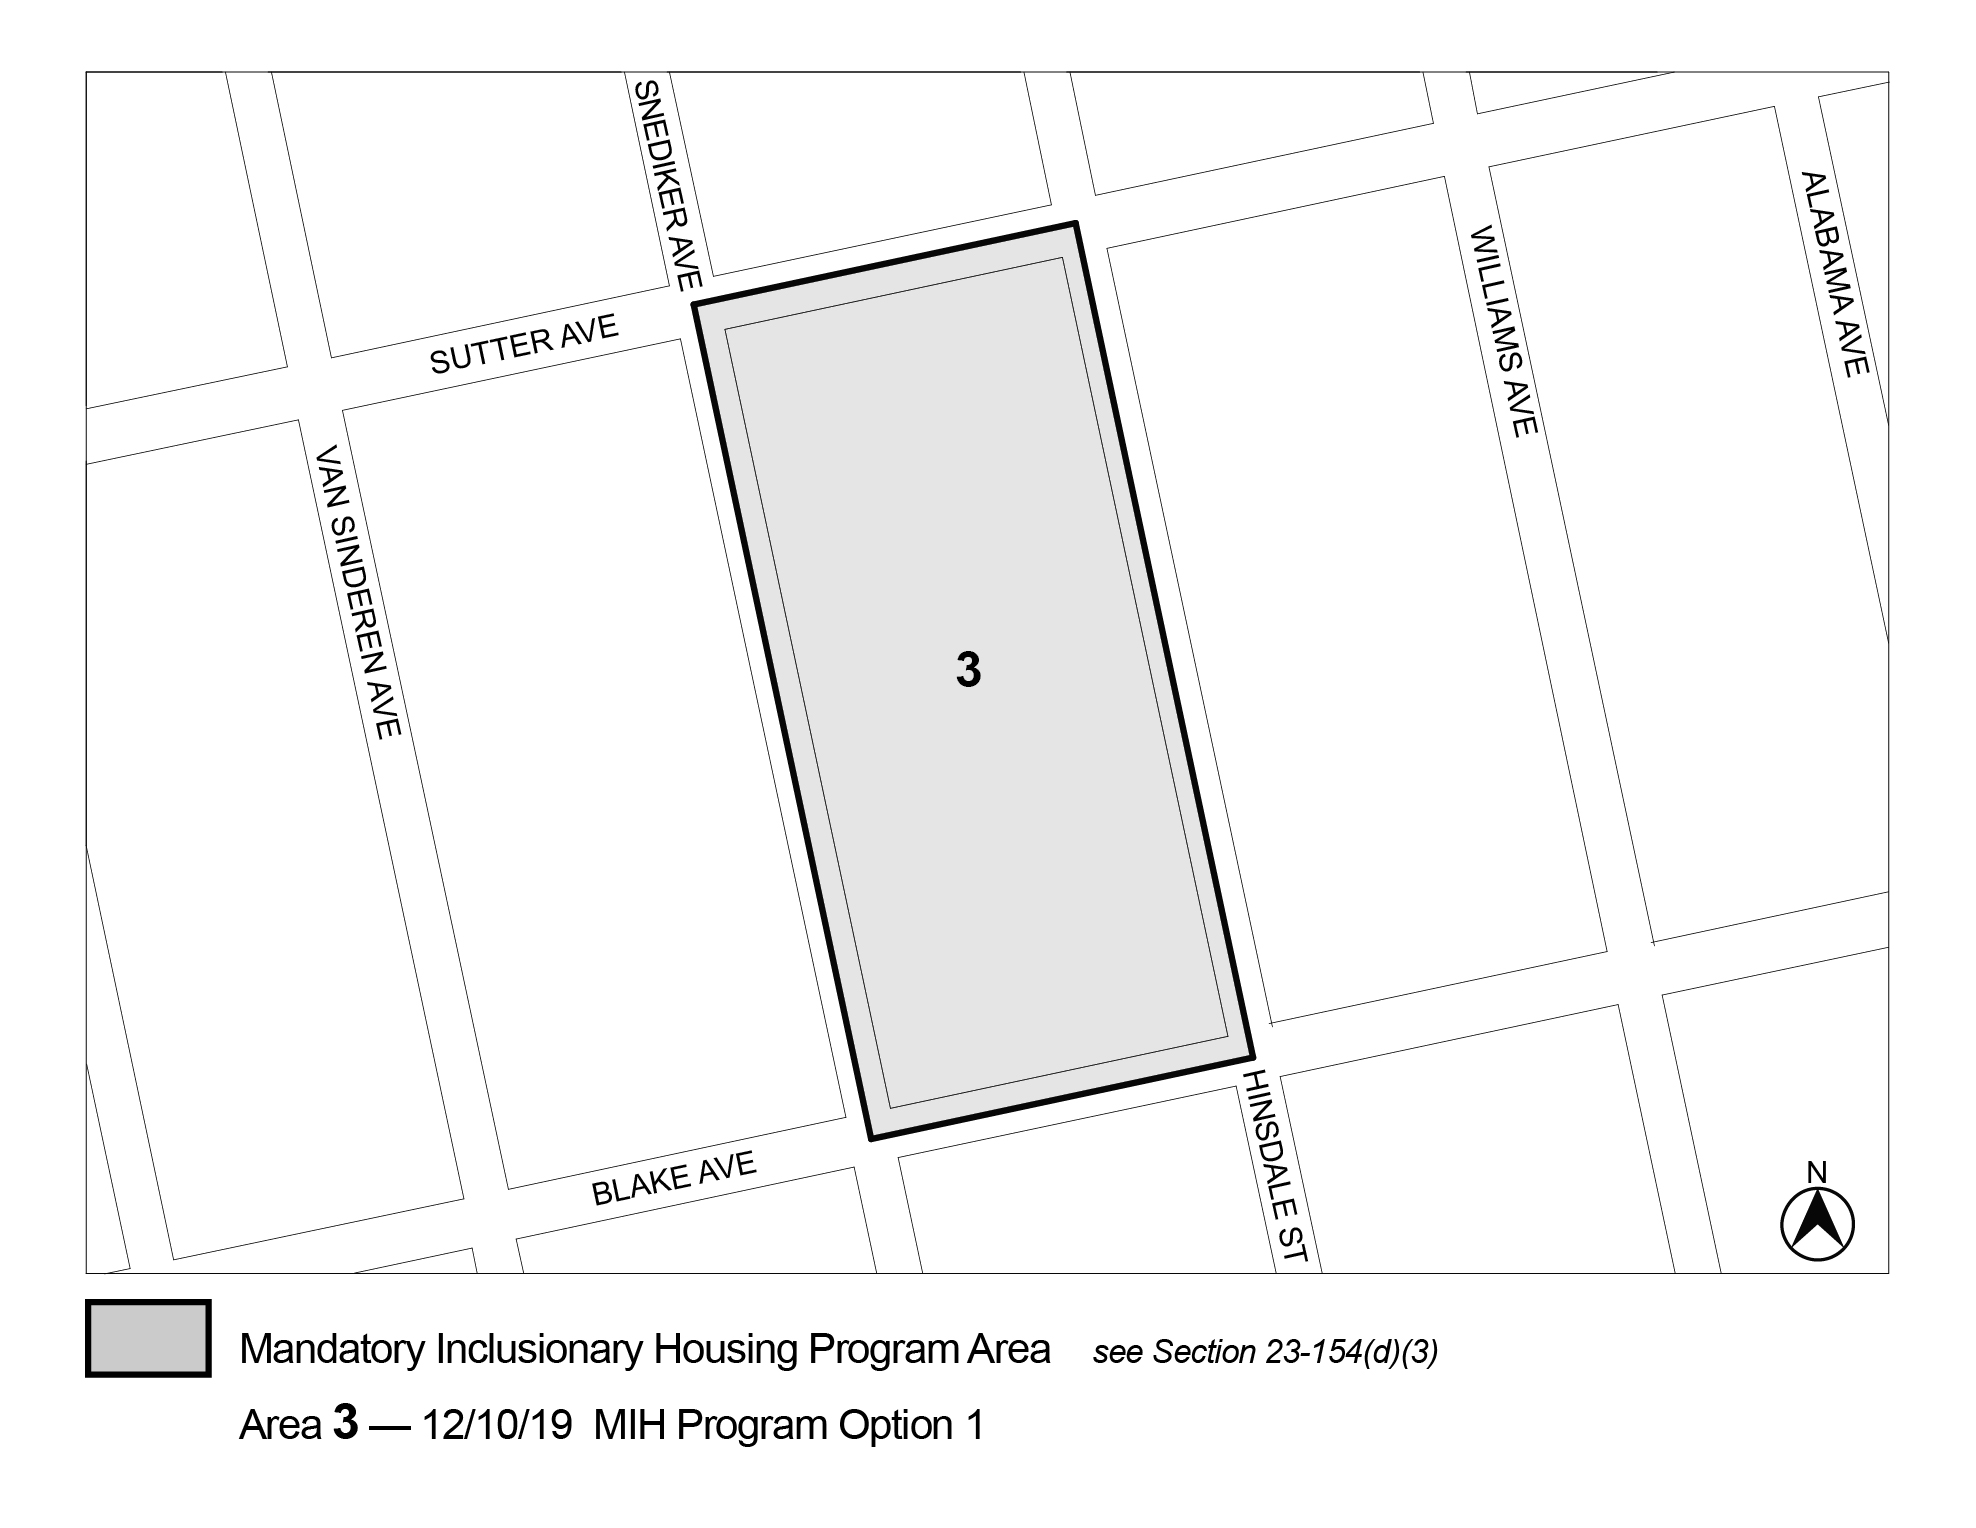 APPENDIX F, Brooklyn CD 5, Map 3, MIH area 3 (Option 1) adopted 10 December, 2019